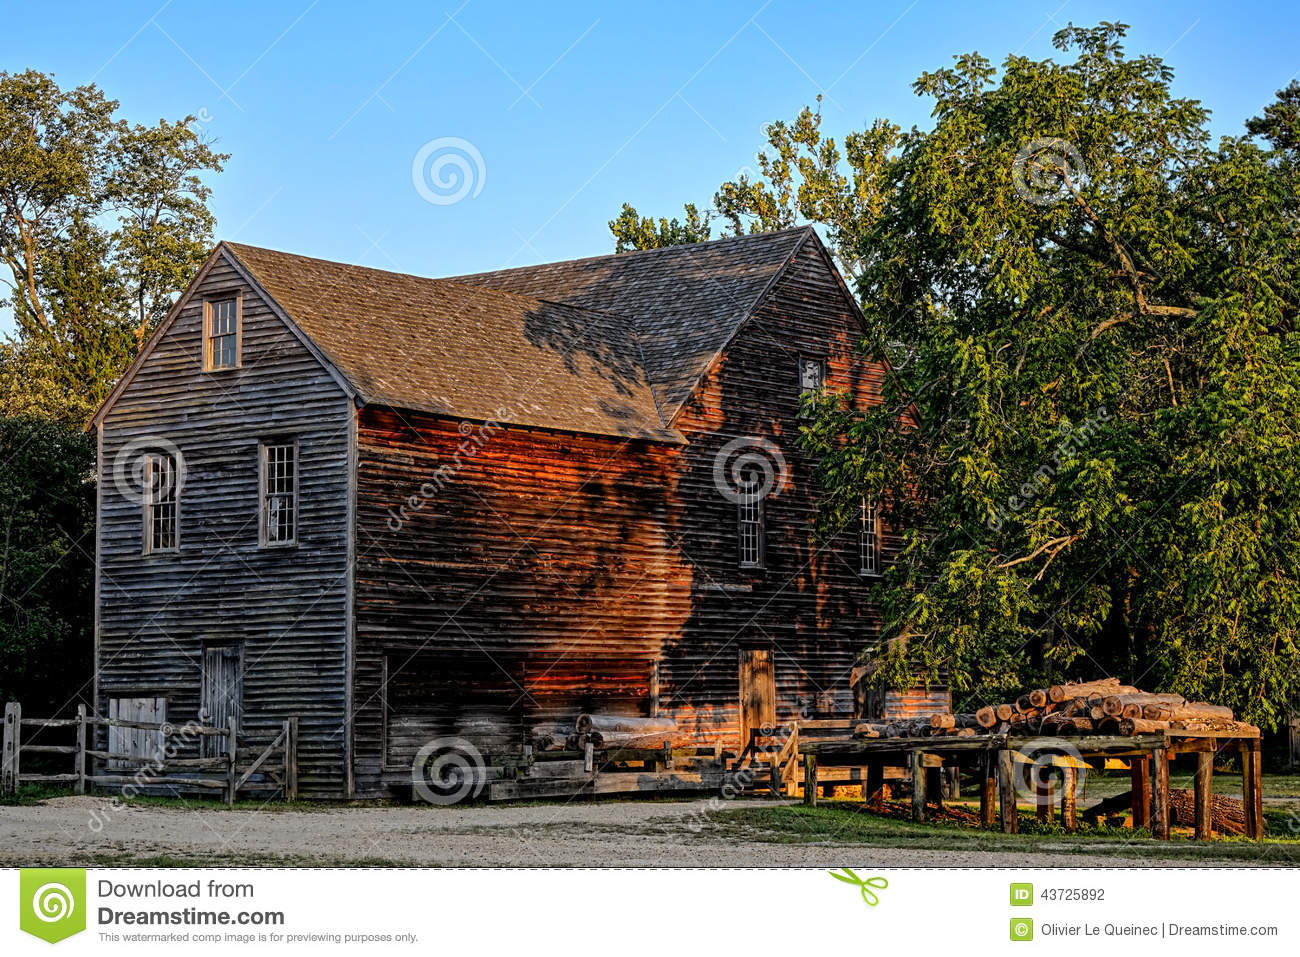 Historic Wood And Lumber Sawmill In Old Village Stock Photo   Image